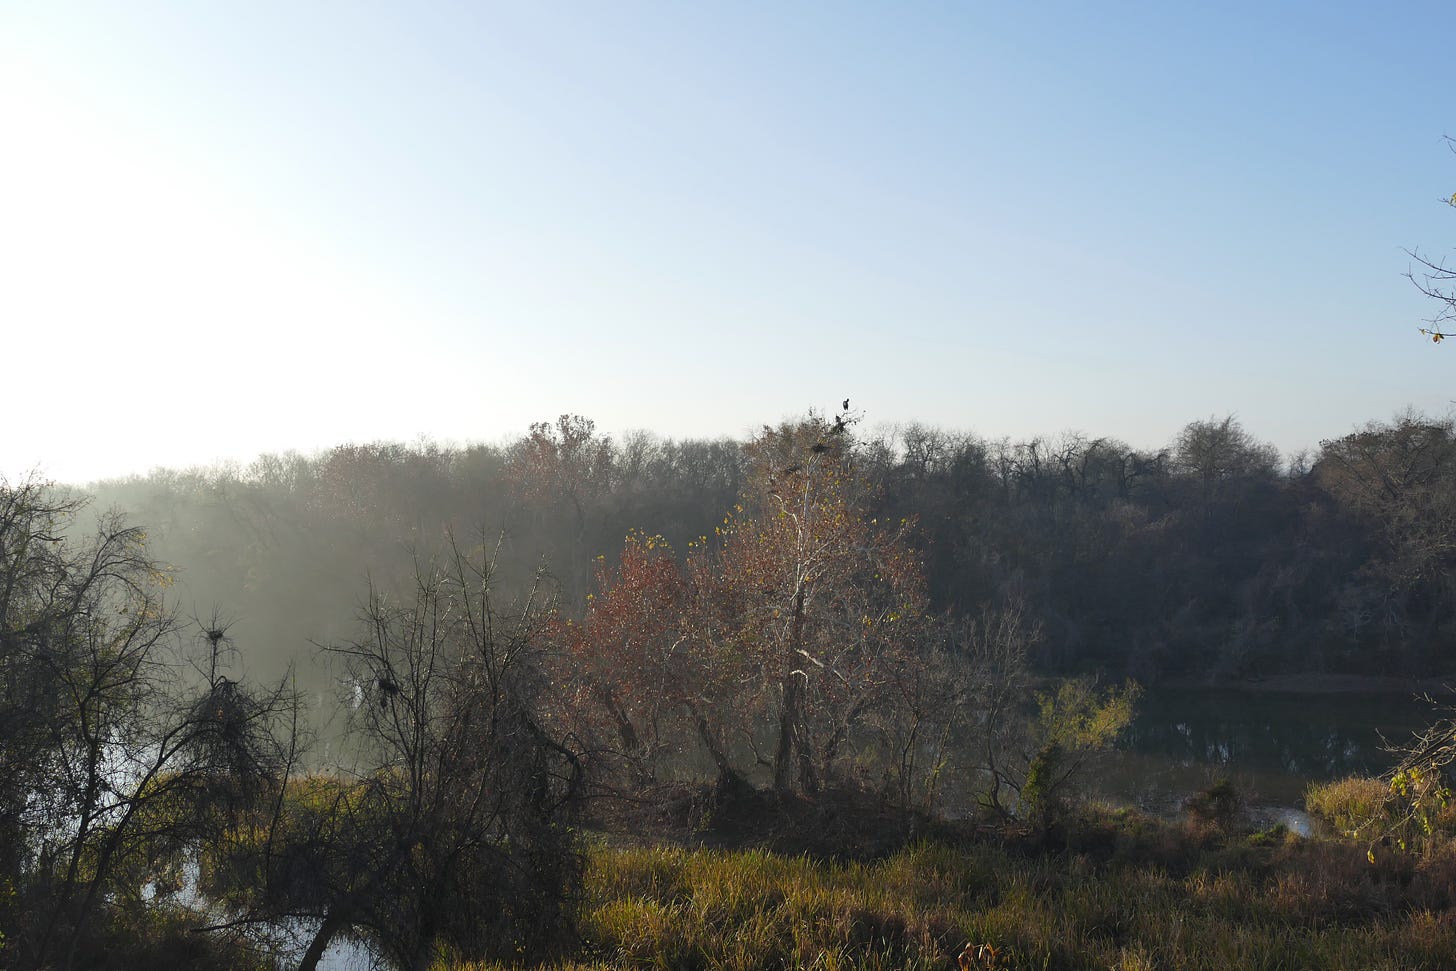 Picture of sunrise on the wooded urban river, with a tall sycamore in the center in which you can just make out the silhouettes of a half-dozen great blue herons